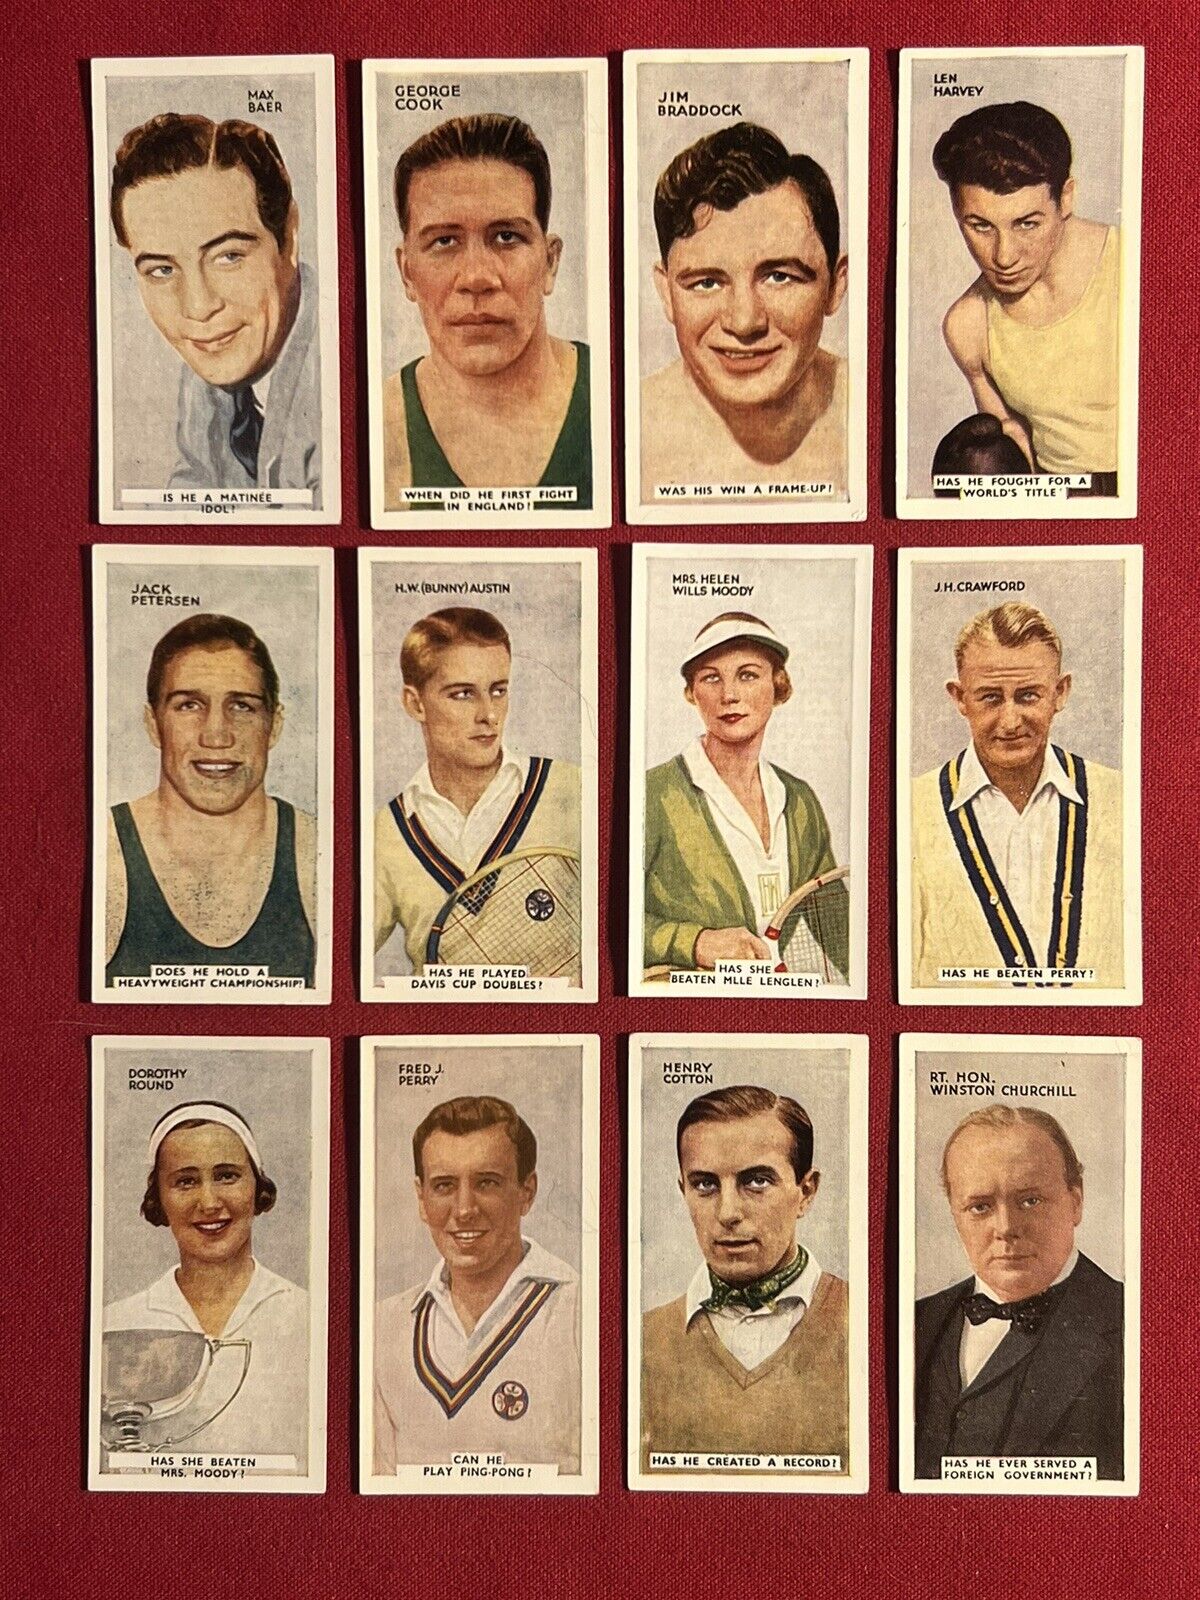 1935 PHILLIPS-IN THE PUBLIC EYE-BOXING-TENNIS-CHURCHILL+54 CARD SET-VG+EXCELLENT